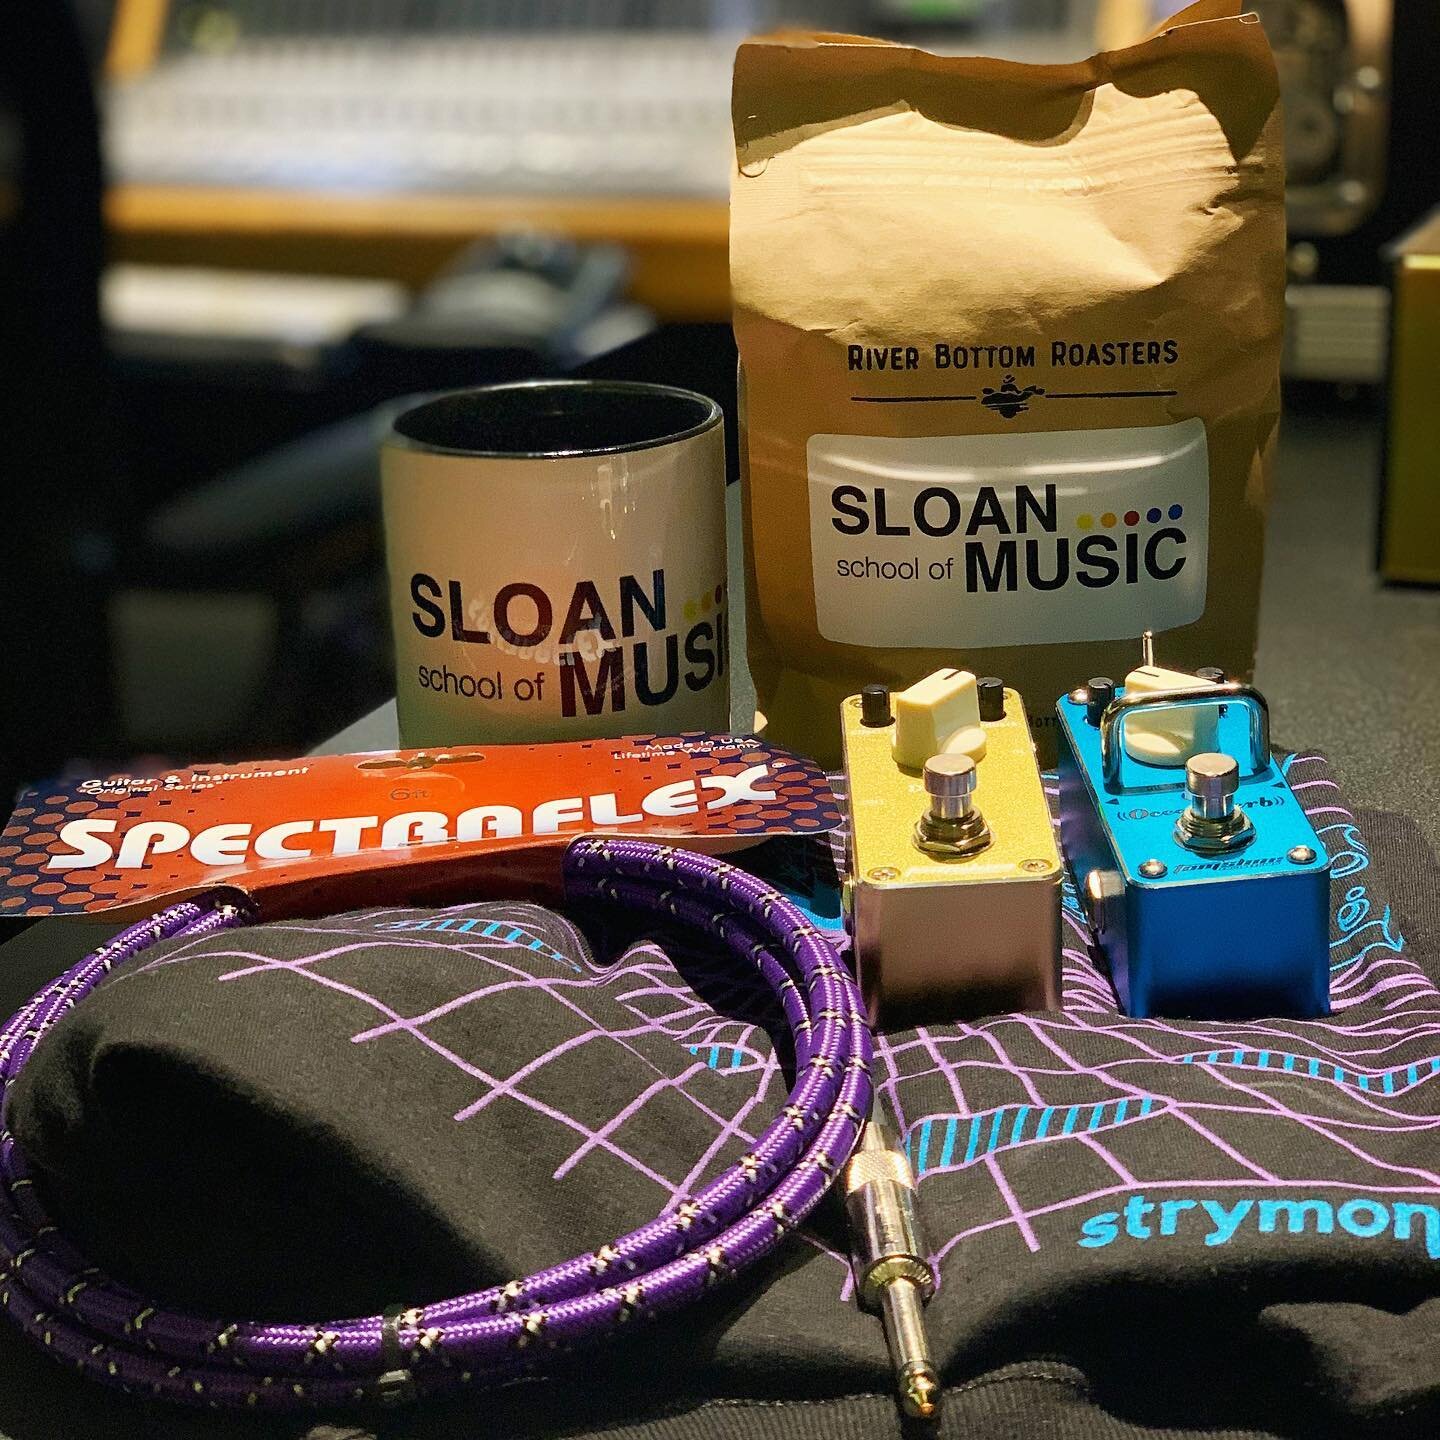 This care package from @sloanschoolofmusic does not suck. Stoked to finally have a well-stocked, family-run music shop TEN MINUTES from the studio!
⠀
Anthony Sloan and I grew up playing music in crappy bands together and I can personally vouch for th